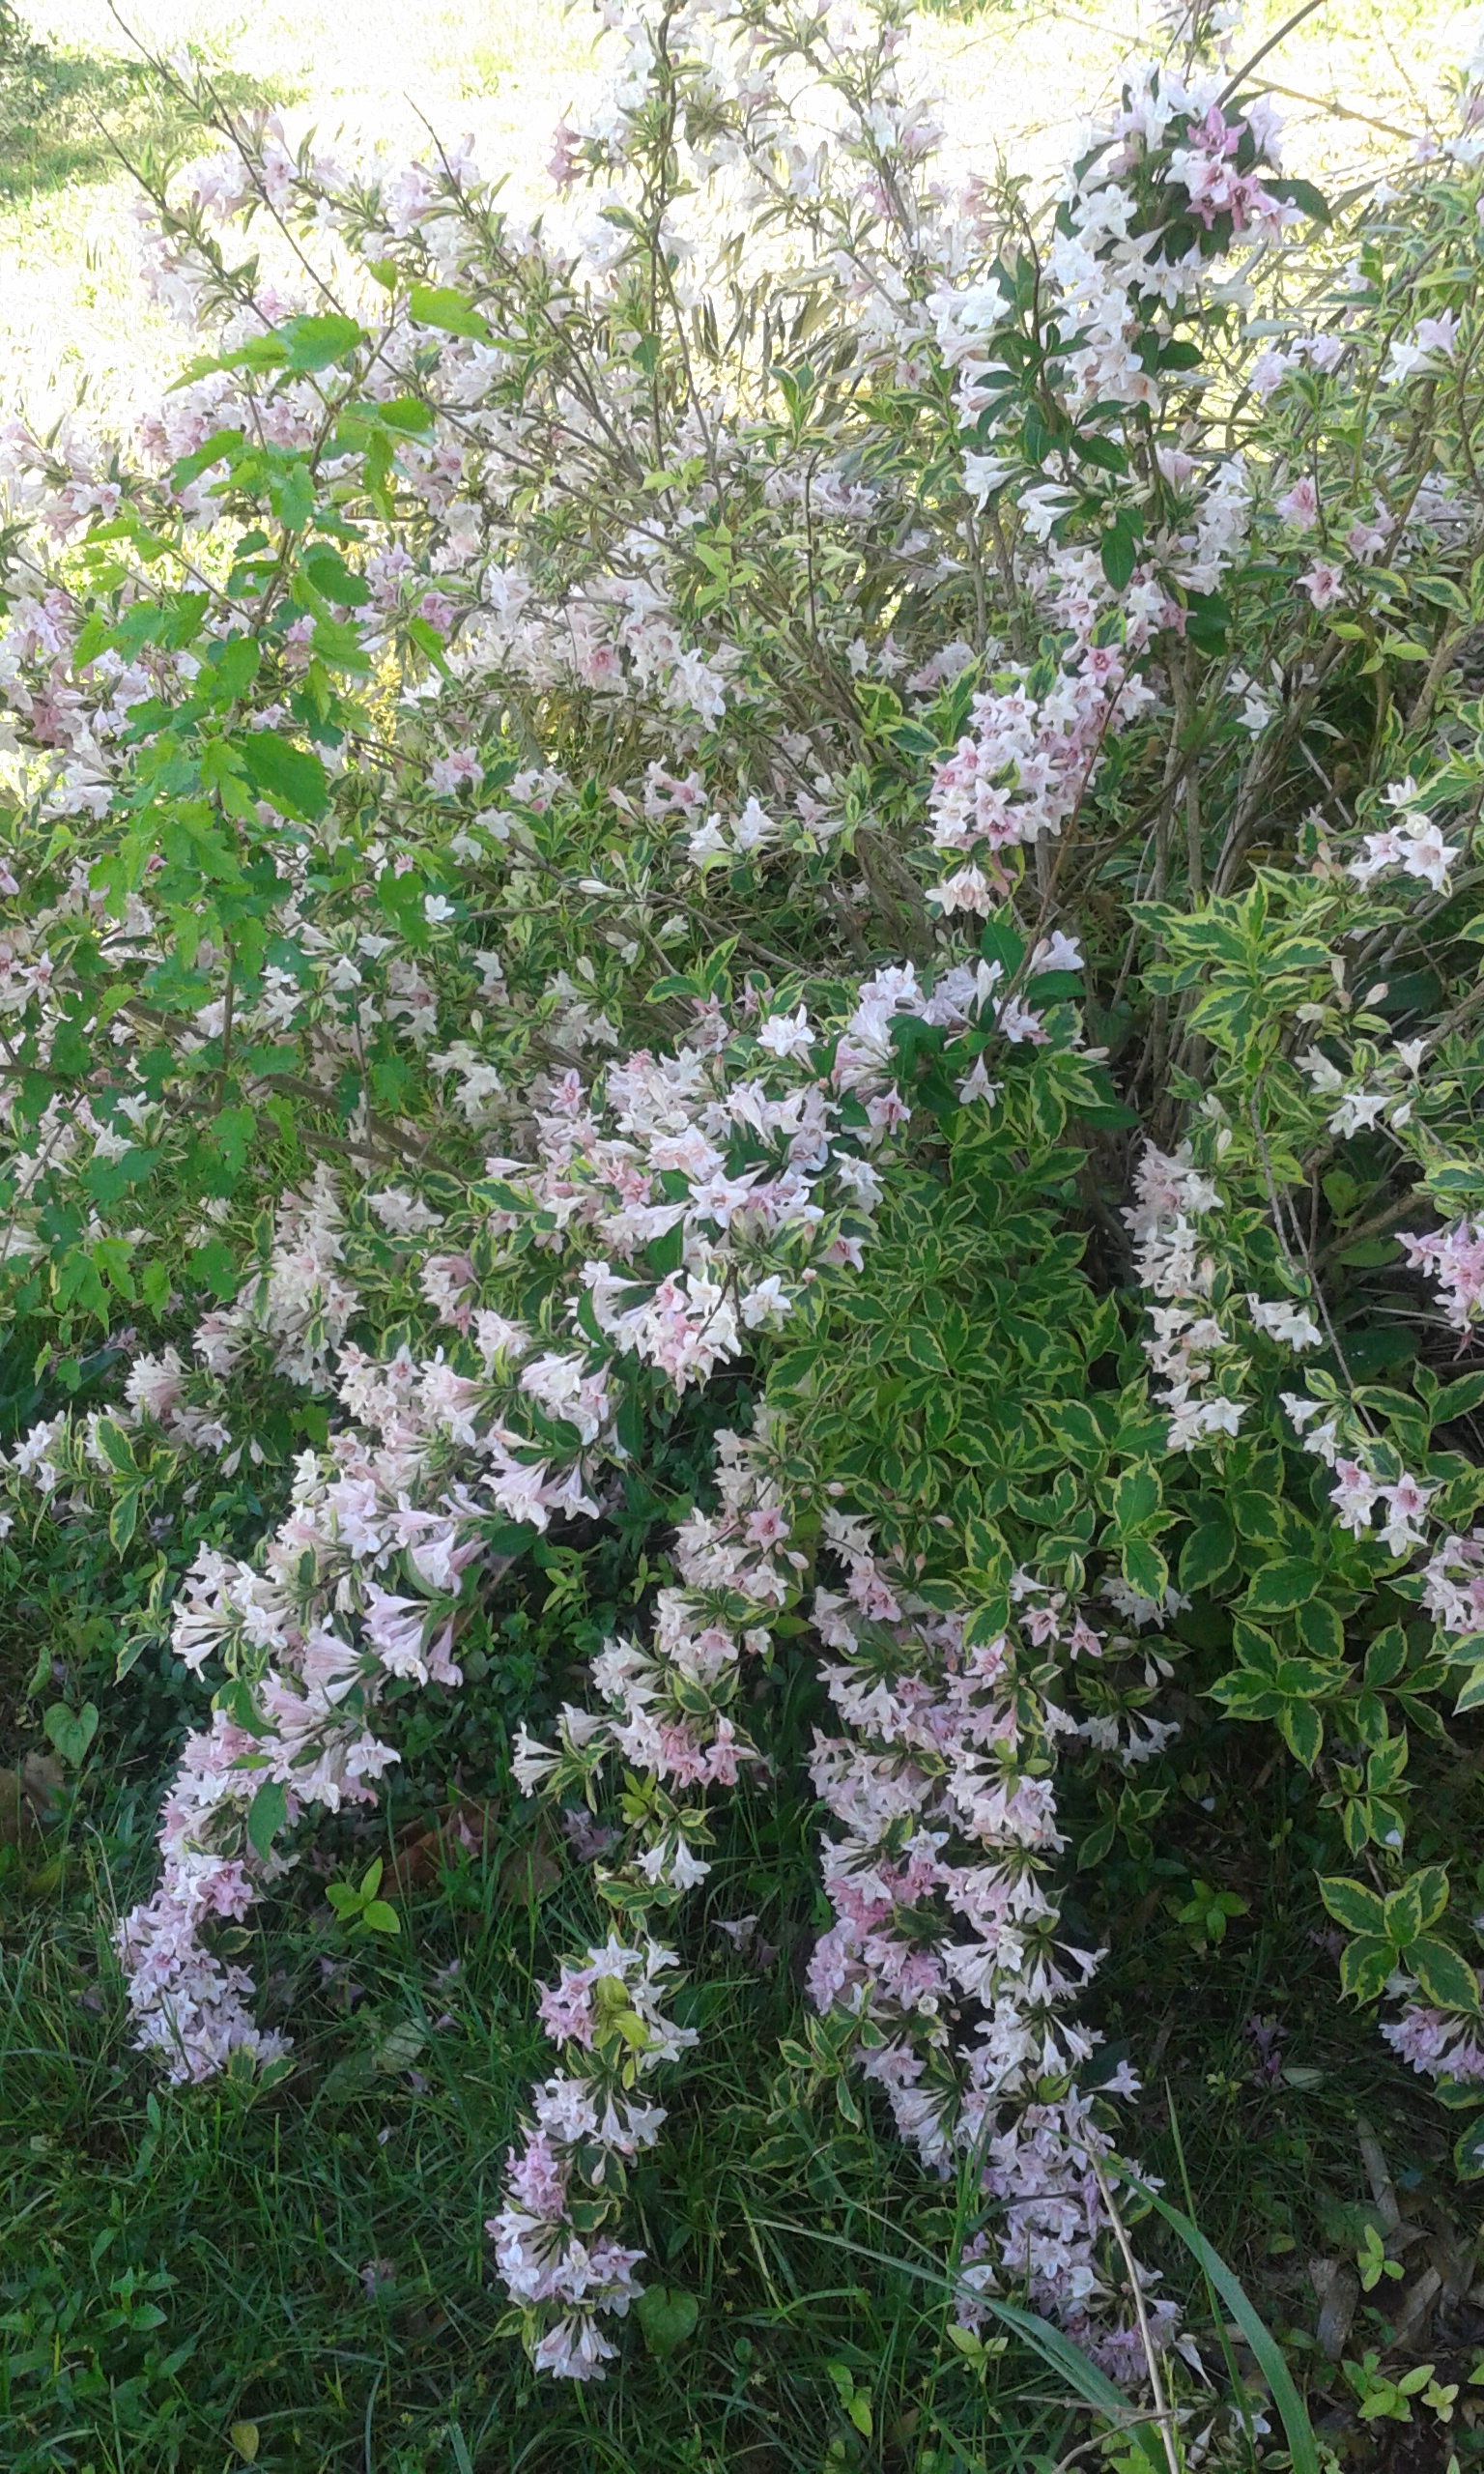 Unknown bush in bloom. Picture is mine.